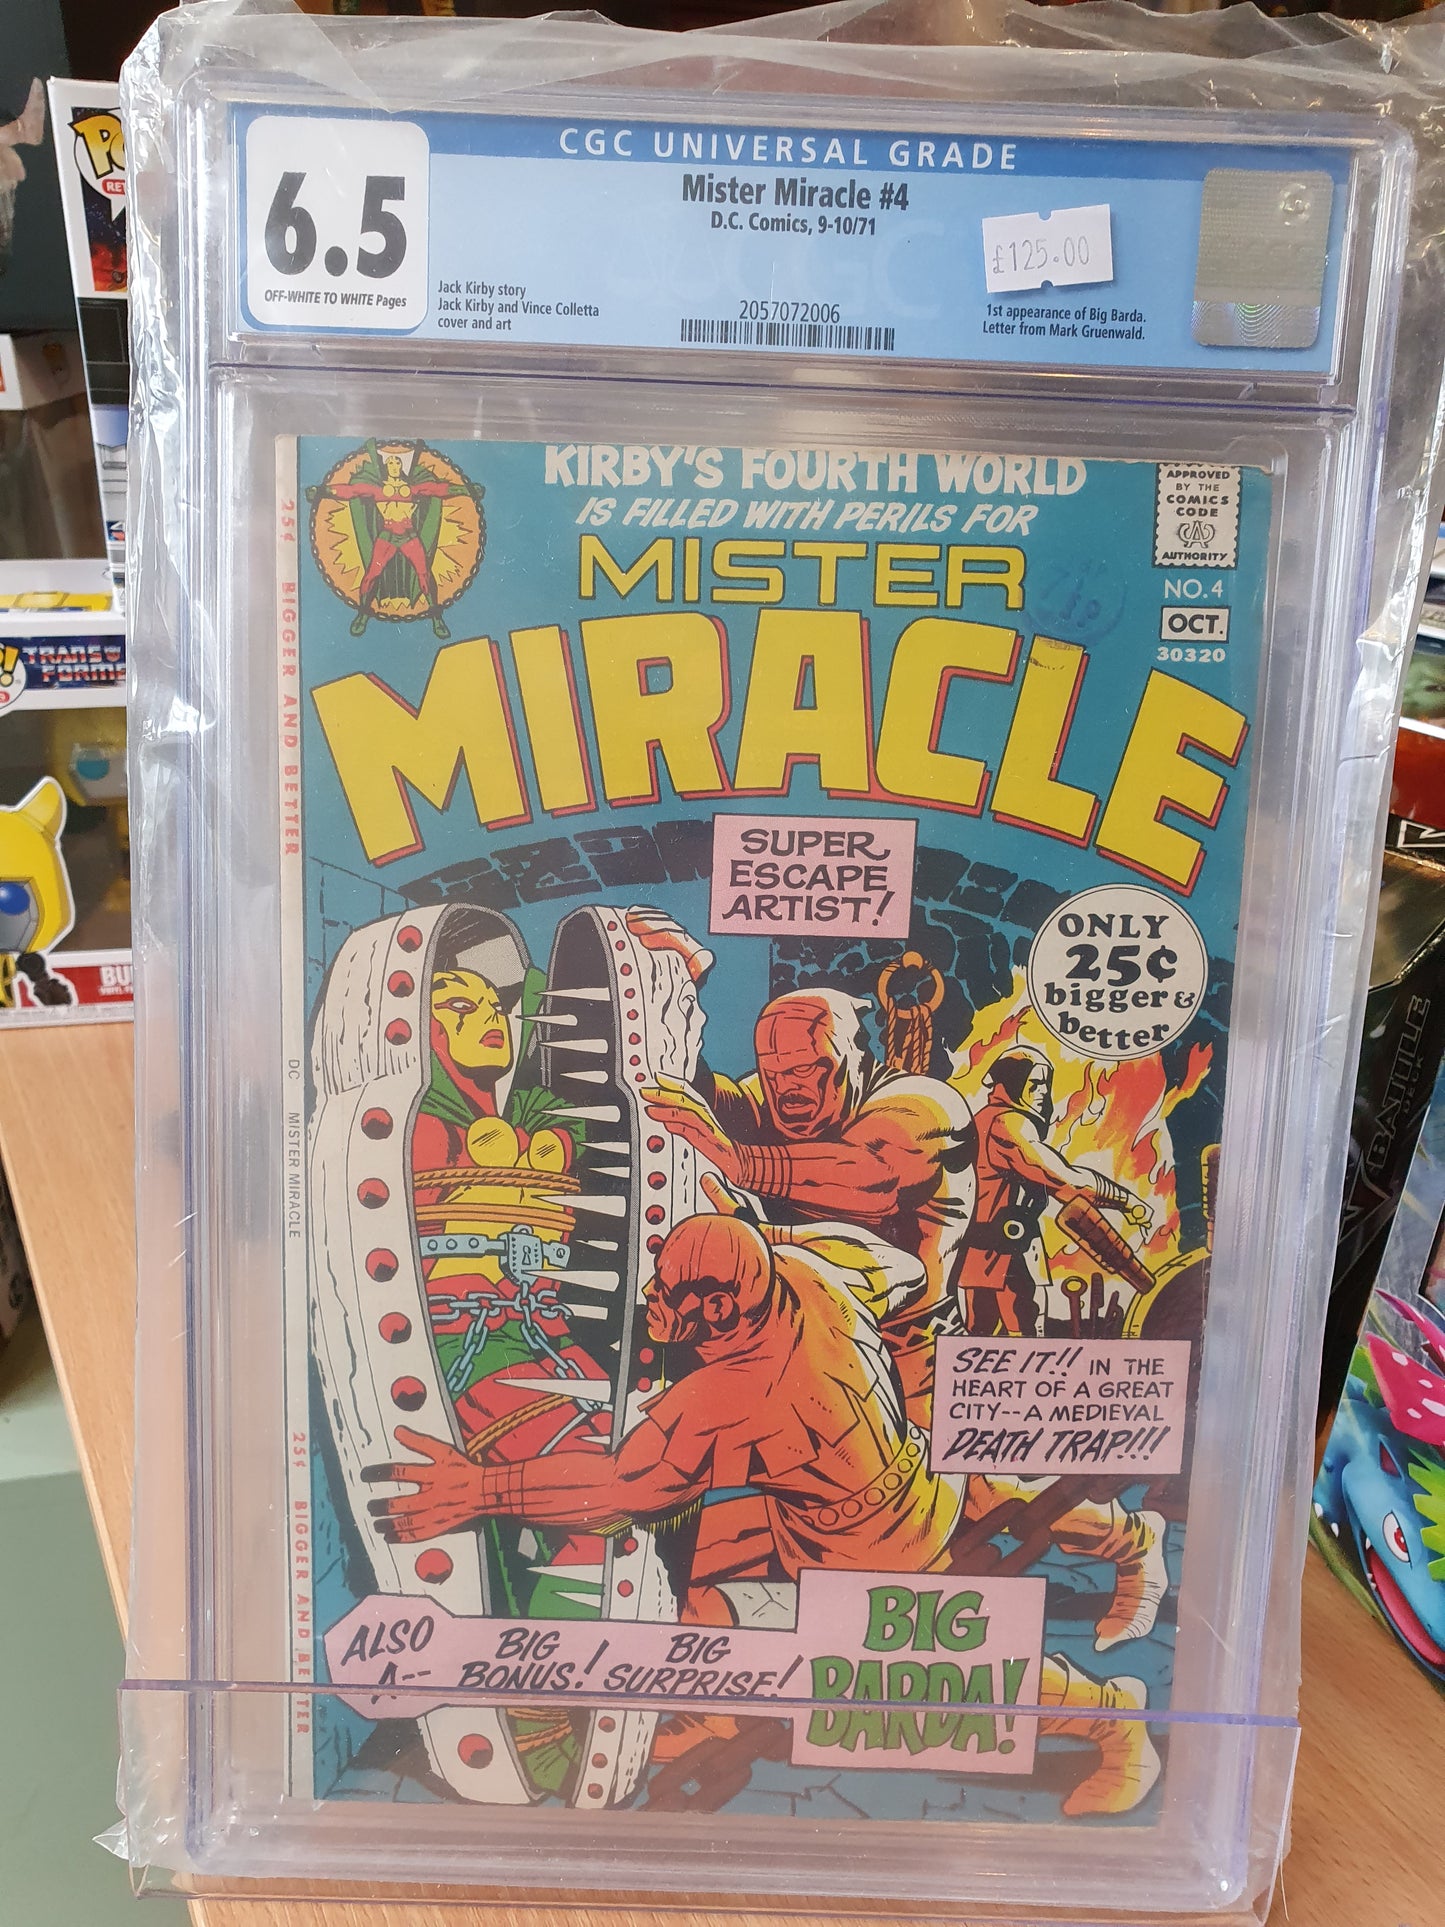 Mister Miracle #4 - CGC Graded 6.5 - 1st appearance of Big Barda.